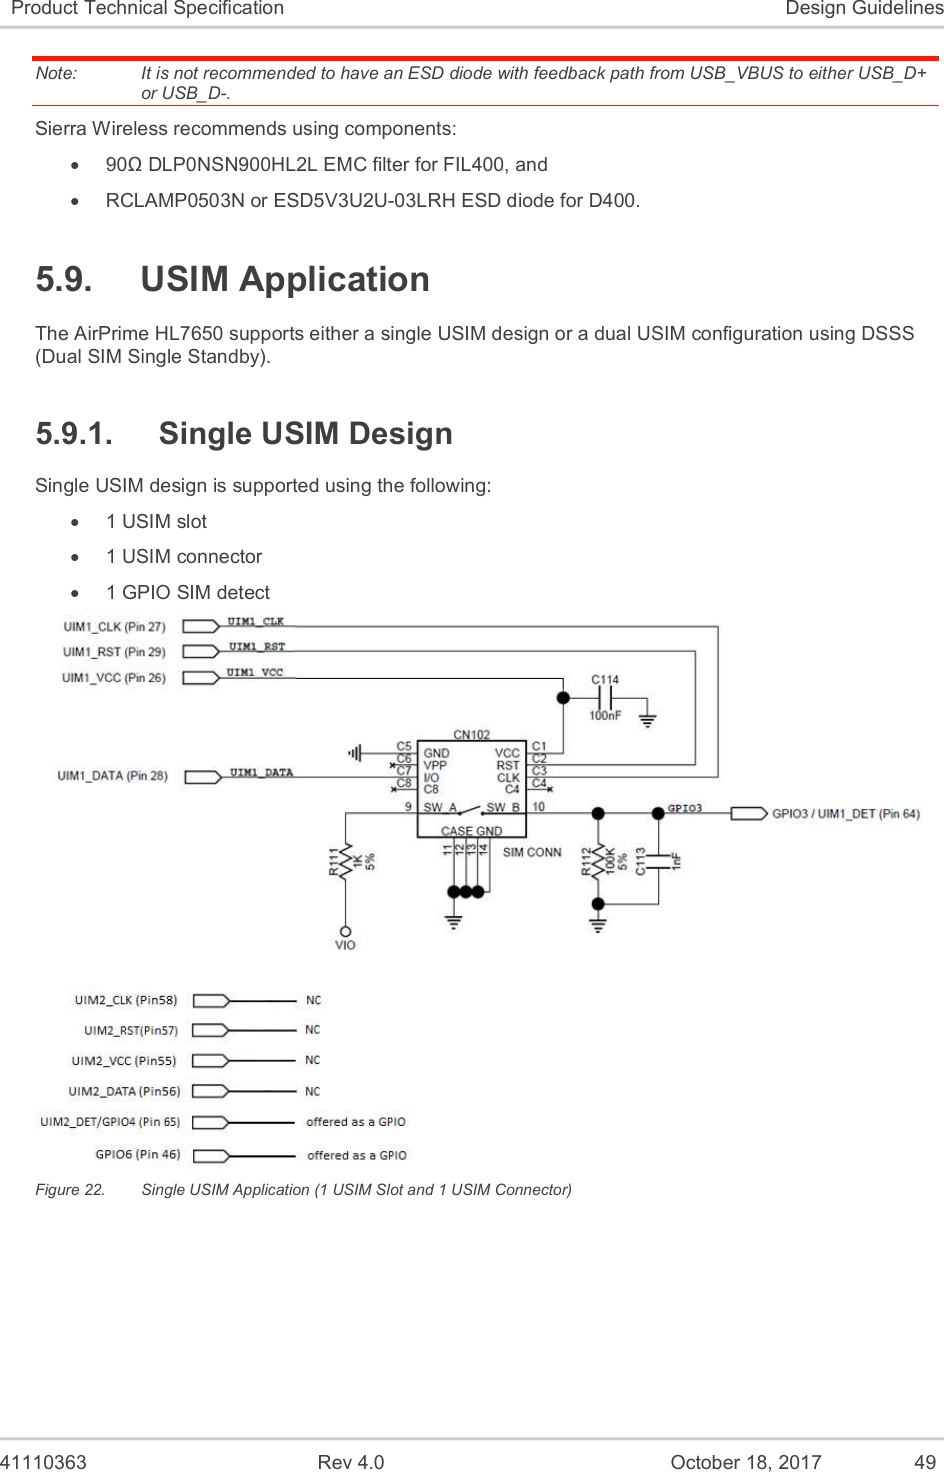   41110363  Rev 4.0  October 18, 2017  49 Product Technical Specification  Design Guidelines Note:   It is not recommended to have an ESD diode with feedback path from USB_VBUS to either USB_D+ or USB_D-. Sierra Wireless recommends using components:   90Ω DLP0NSN900HL2L EMC filter for FIL400, and   RCLAMP0503N or ESD5V3U2U-03LRH ESD diode for D400. 5.9.  USIM Application The AirPrime HL7650 supports either a single USIM design or a dual USIM configuration using DSSS (Dual SIM Single Standby). 5.9.1.  Single USIM Design Single USIM design is supported using the following:    1 USIM slot   1 USIM connector   1 GPIO SIM detect  Figure 22.  Single USIM Application (1 USIM Slot and 1 USIM Connector) 